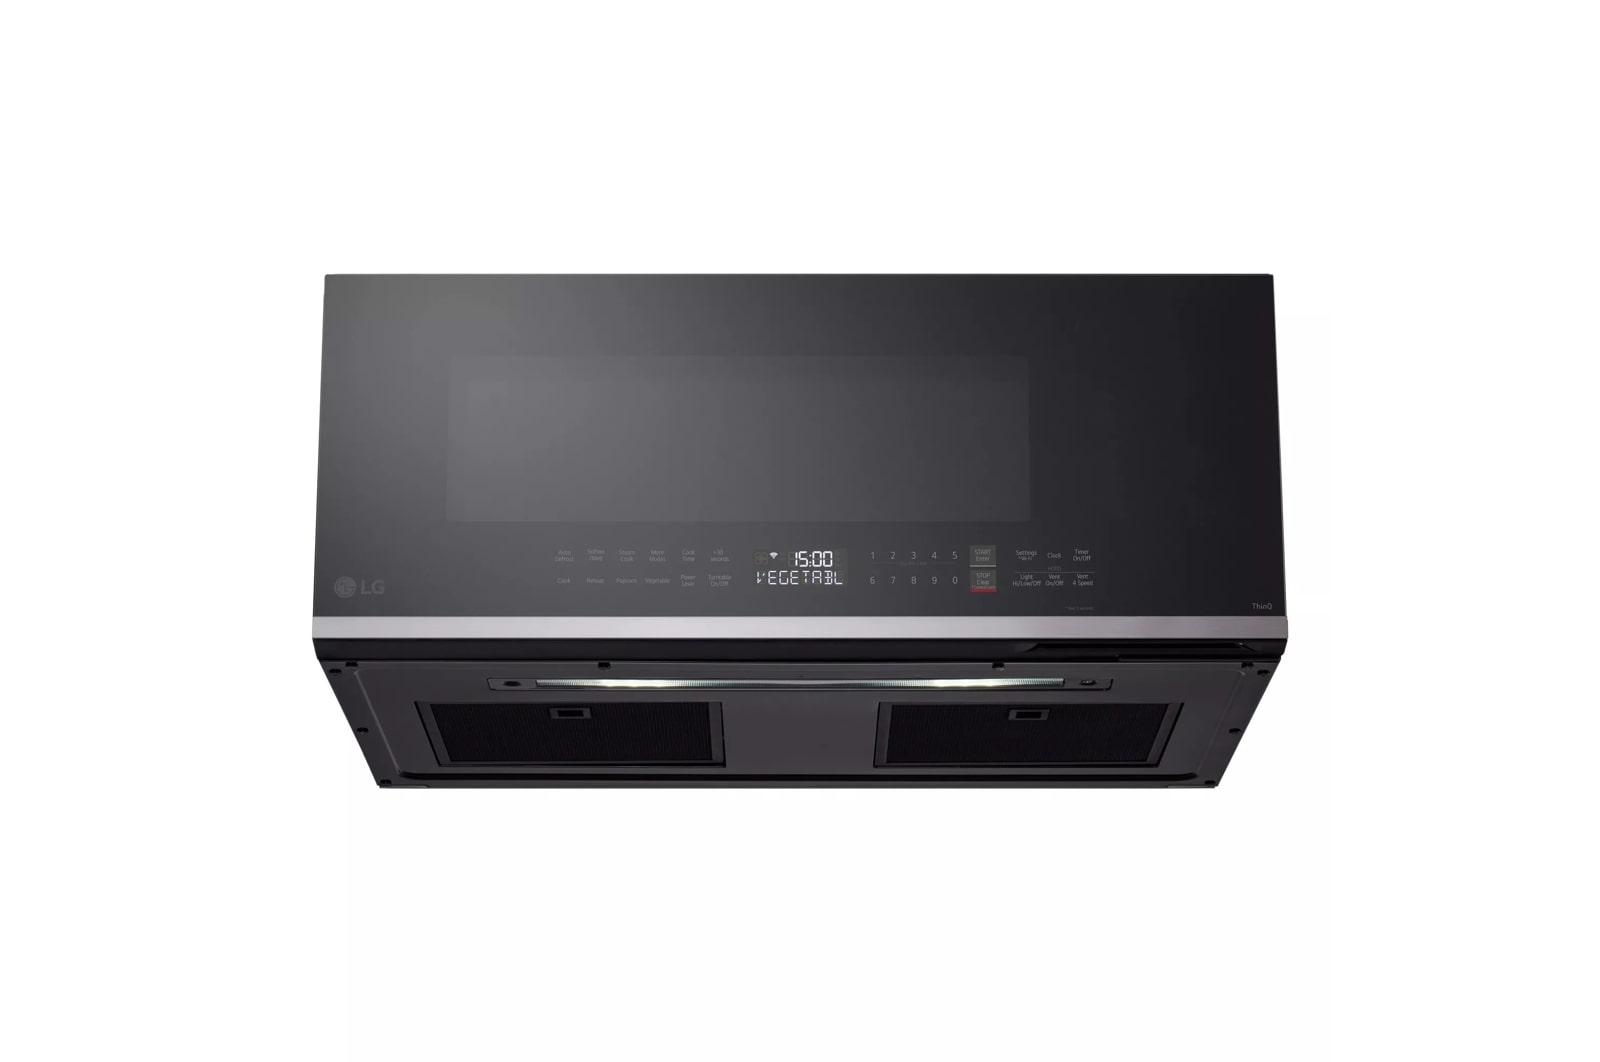 Lg 1.3 cu. ft. Smart Low Profile Over-the-Range Microwave Oven with Sensor Cook